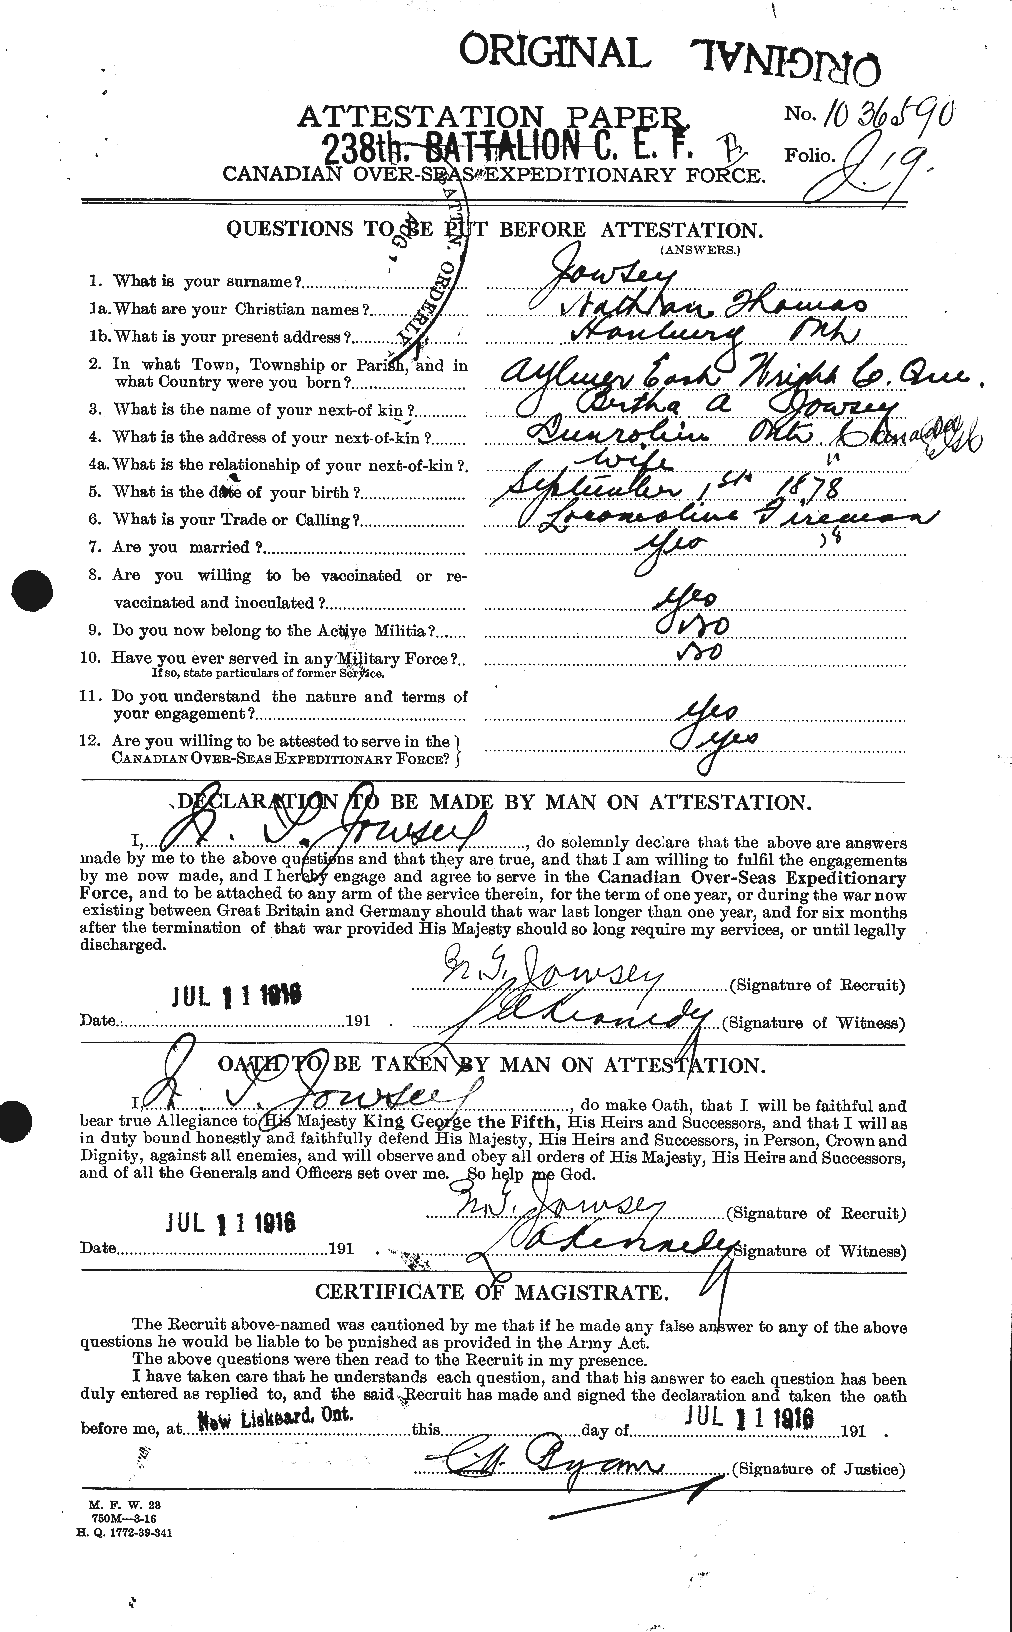 Personnel Records of the First World War - CEF 426343a